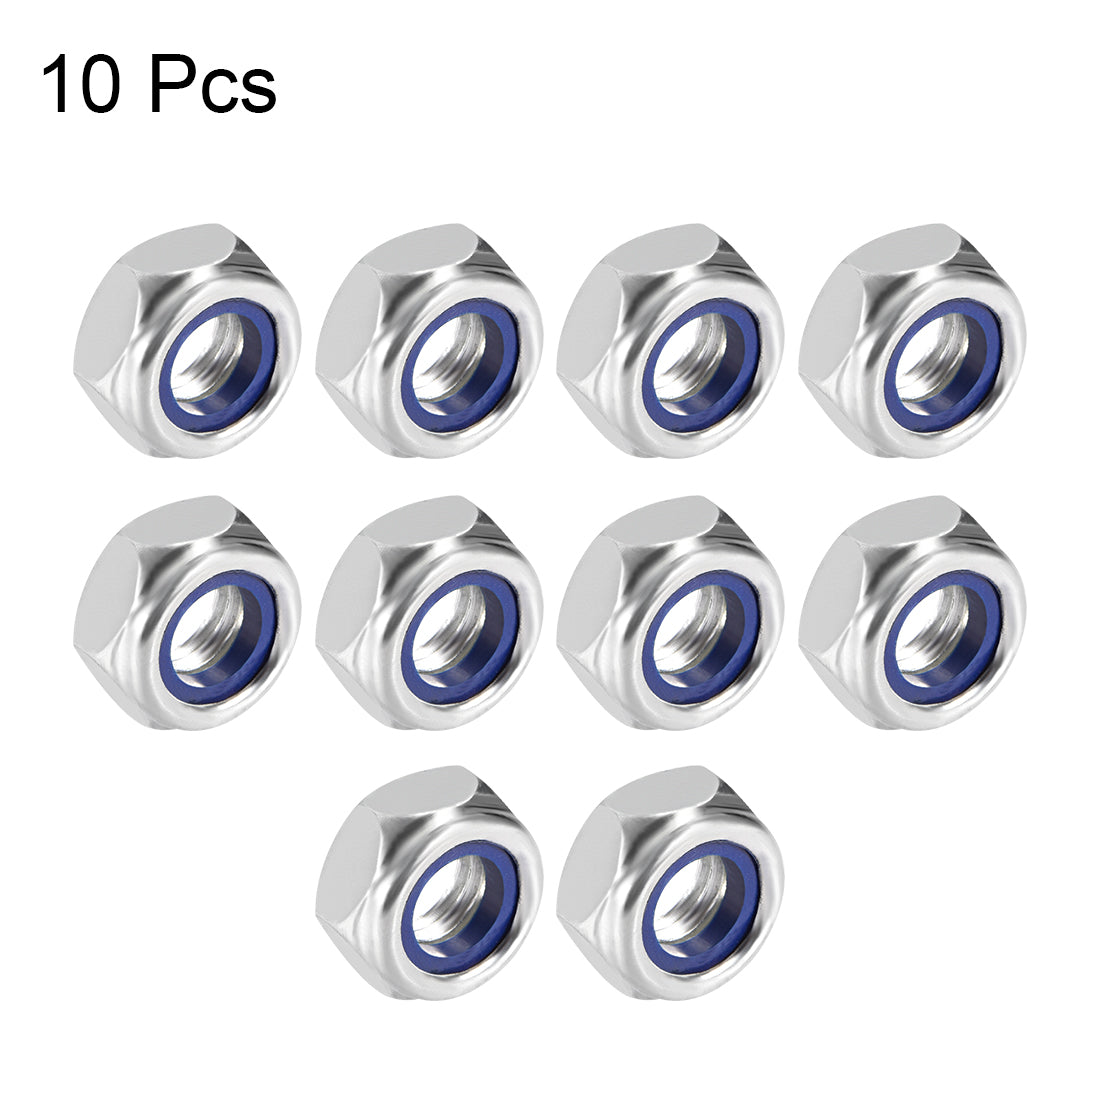 Uxcell Uxcell M6 x1mm Nylon Insert Hex Lock Nuts, Carbon Steel White Zinc Plated, 20 Pcs